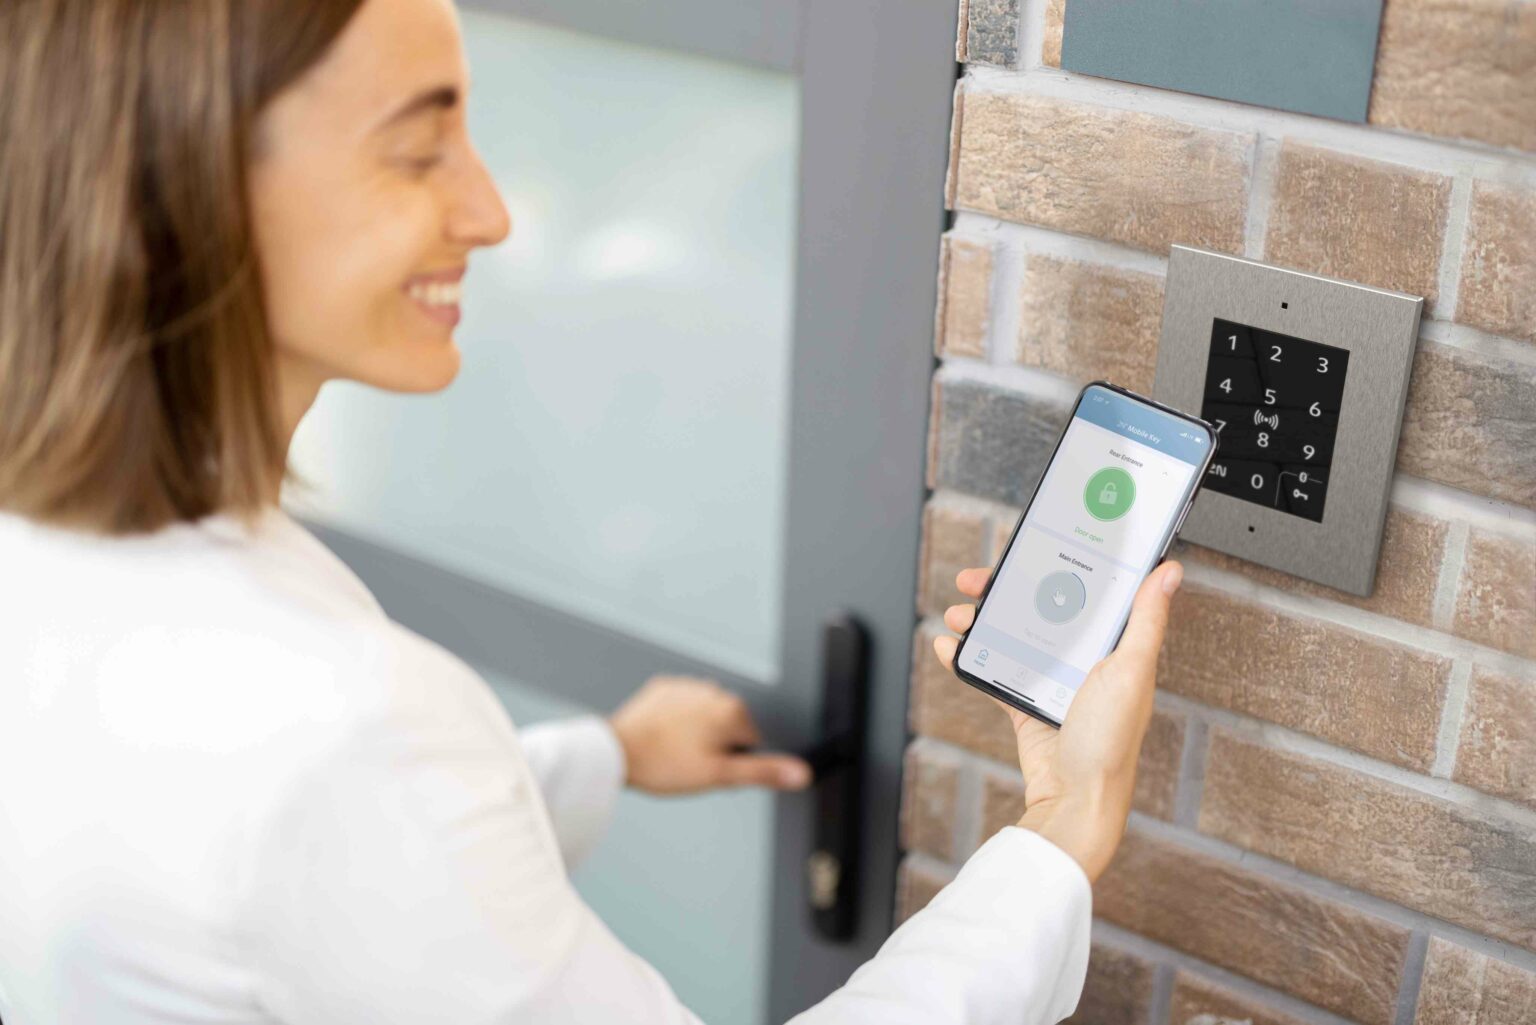 2N unveils access control reader built with flexibility in mind